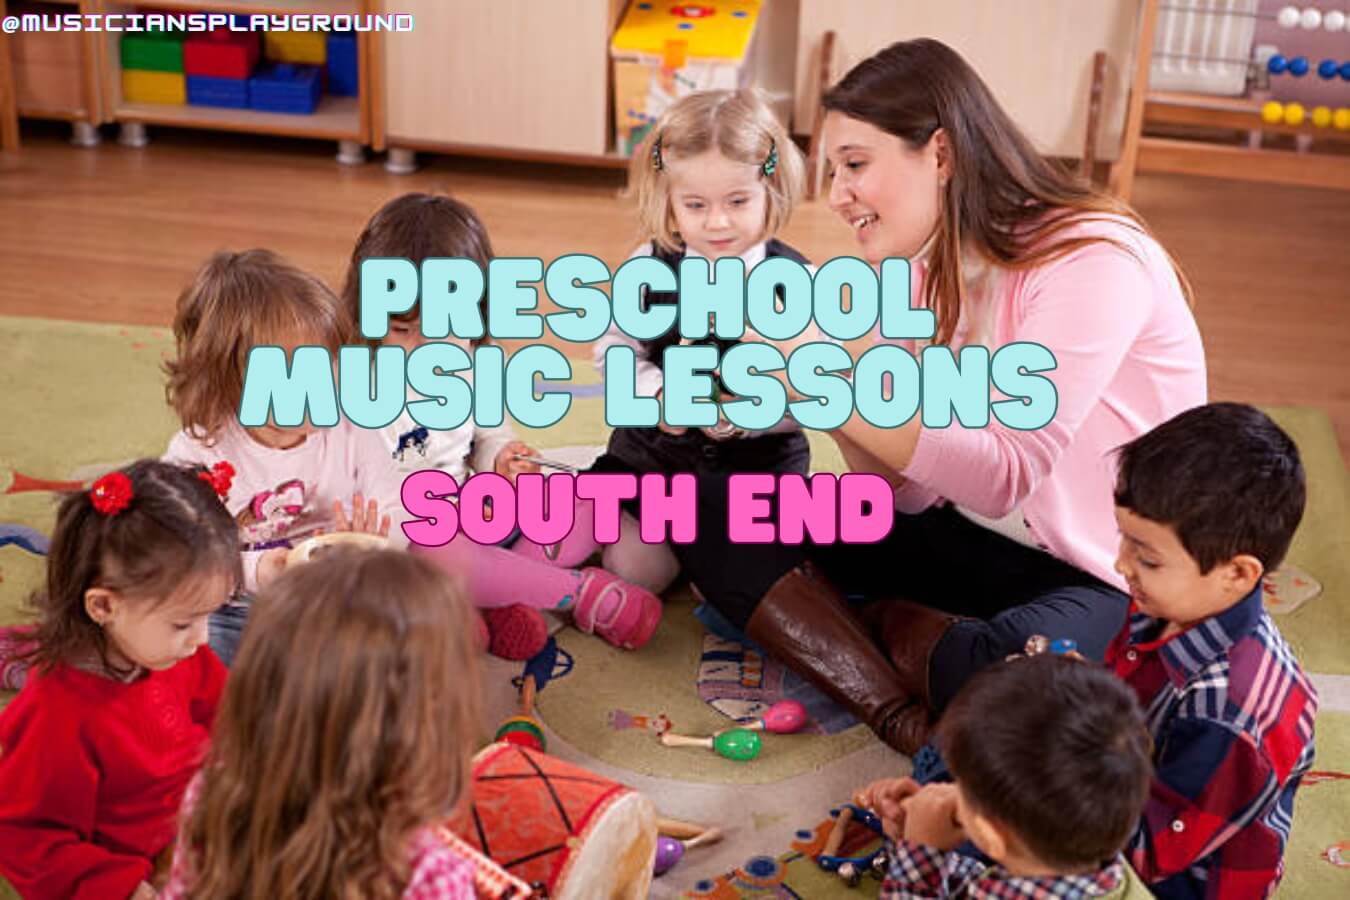 Preschool Music Lessons in South End, Massachusetts: Music Education for Young Children at Musicians Playground